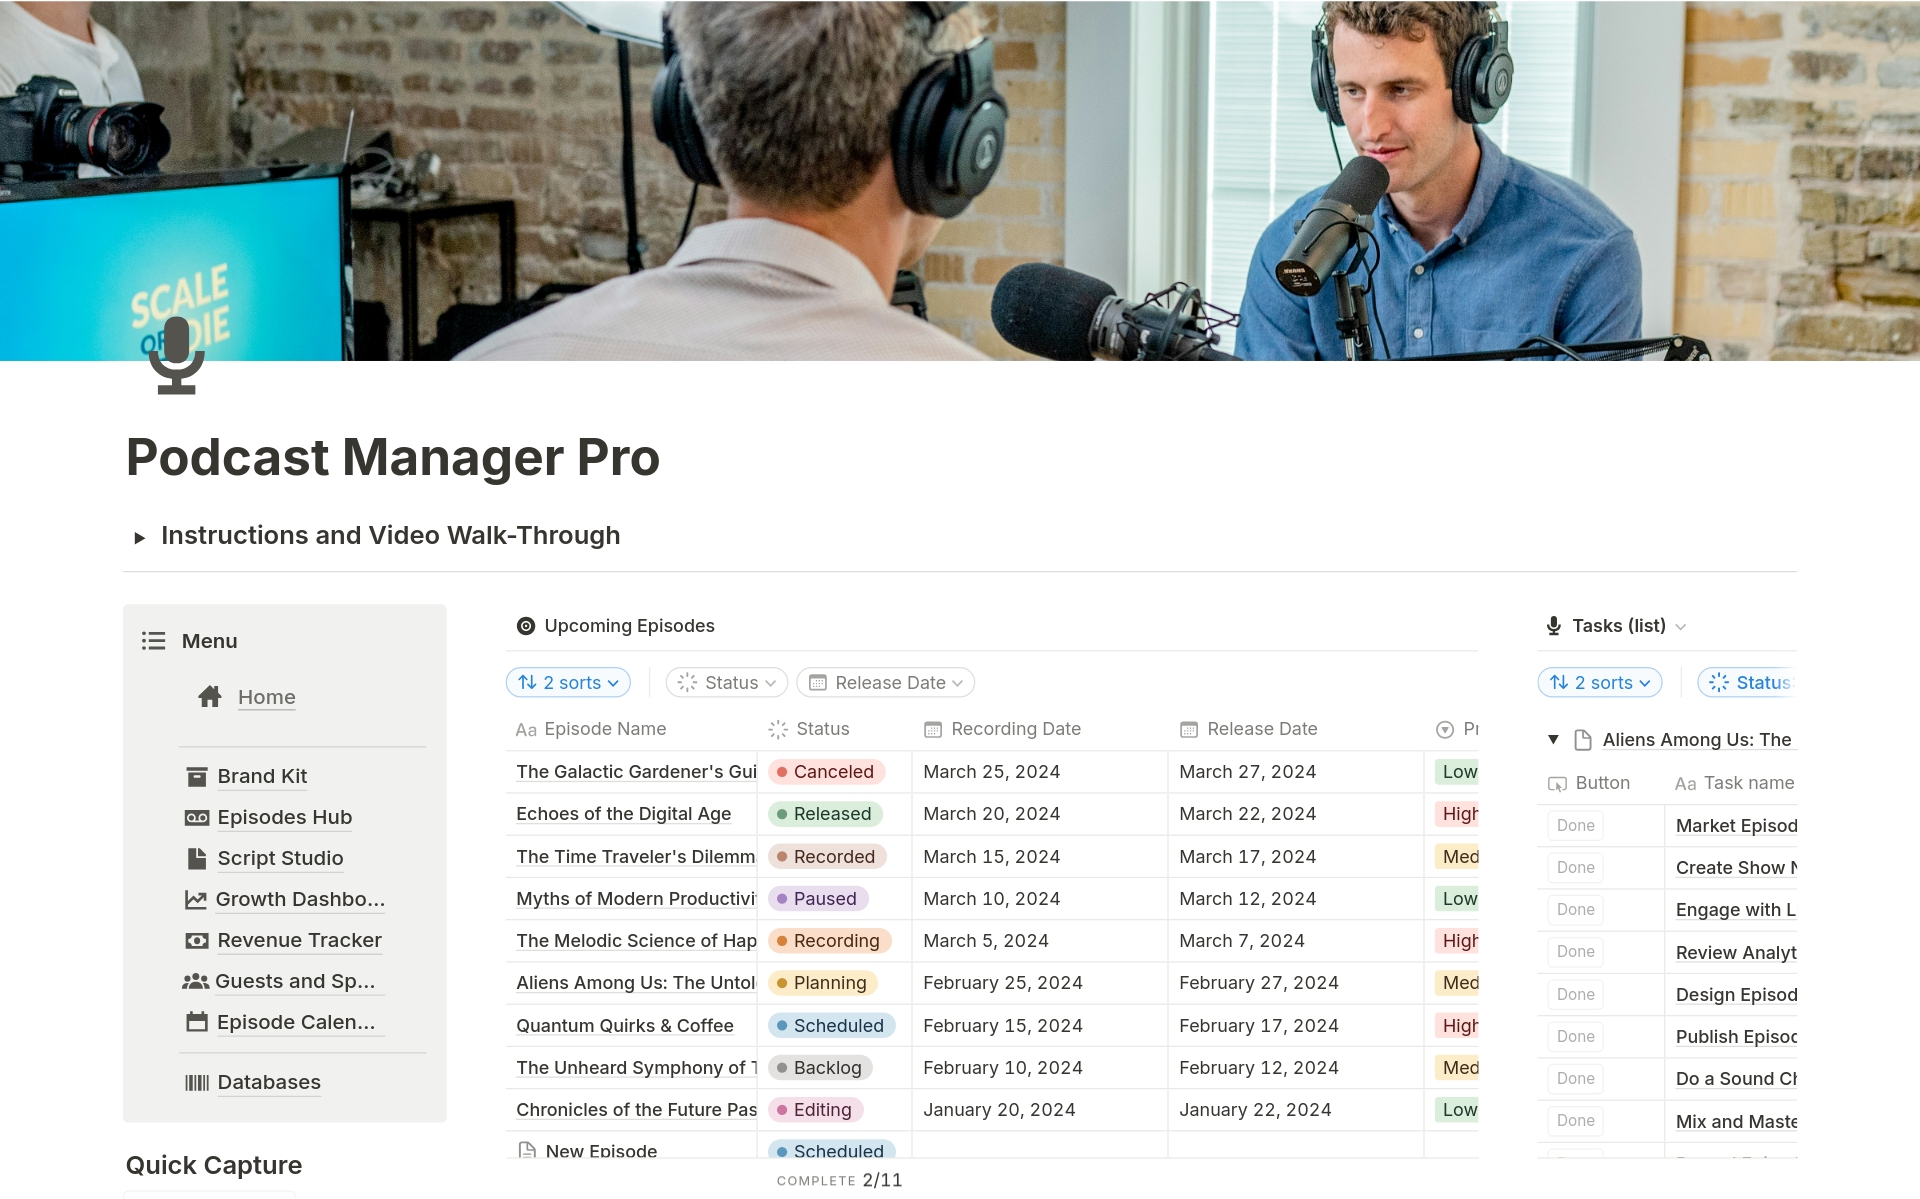 The Podcast Production Manager Pro is specifically catered to Podcasters who want to make their passion their profession. Offering expertly designed features for the everyday management of a Podcast, it includes features to monitor and increase revenue and sponsorship. 